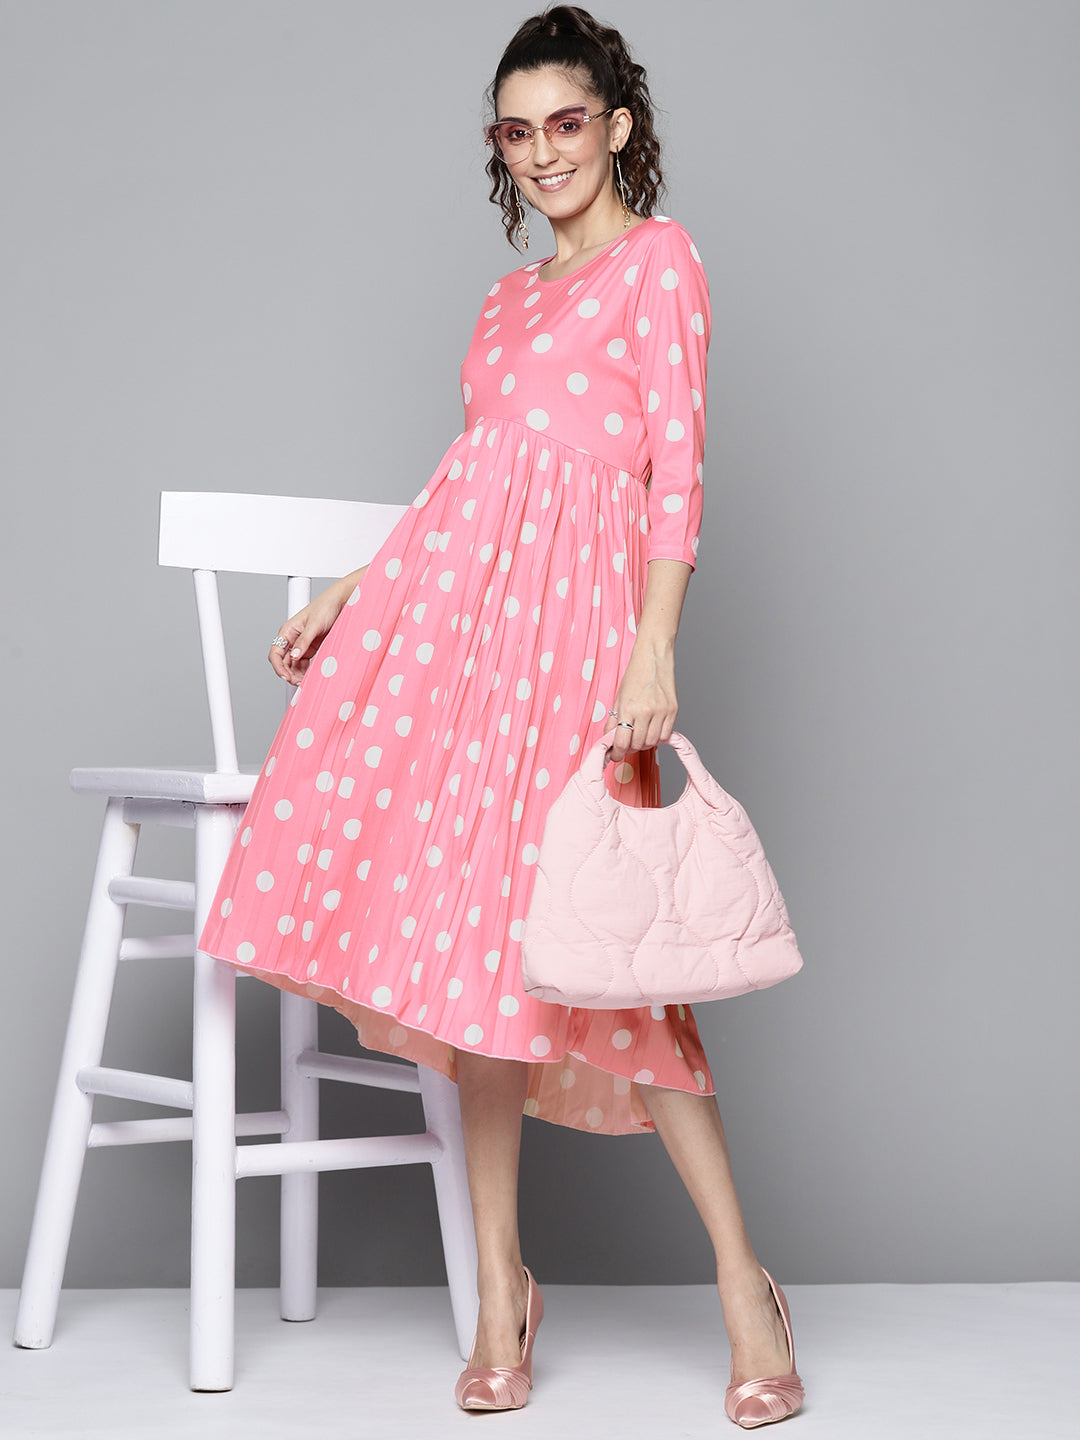 Women Pink and White Polka Dot Round Neck Pleated Dress